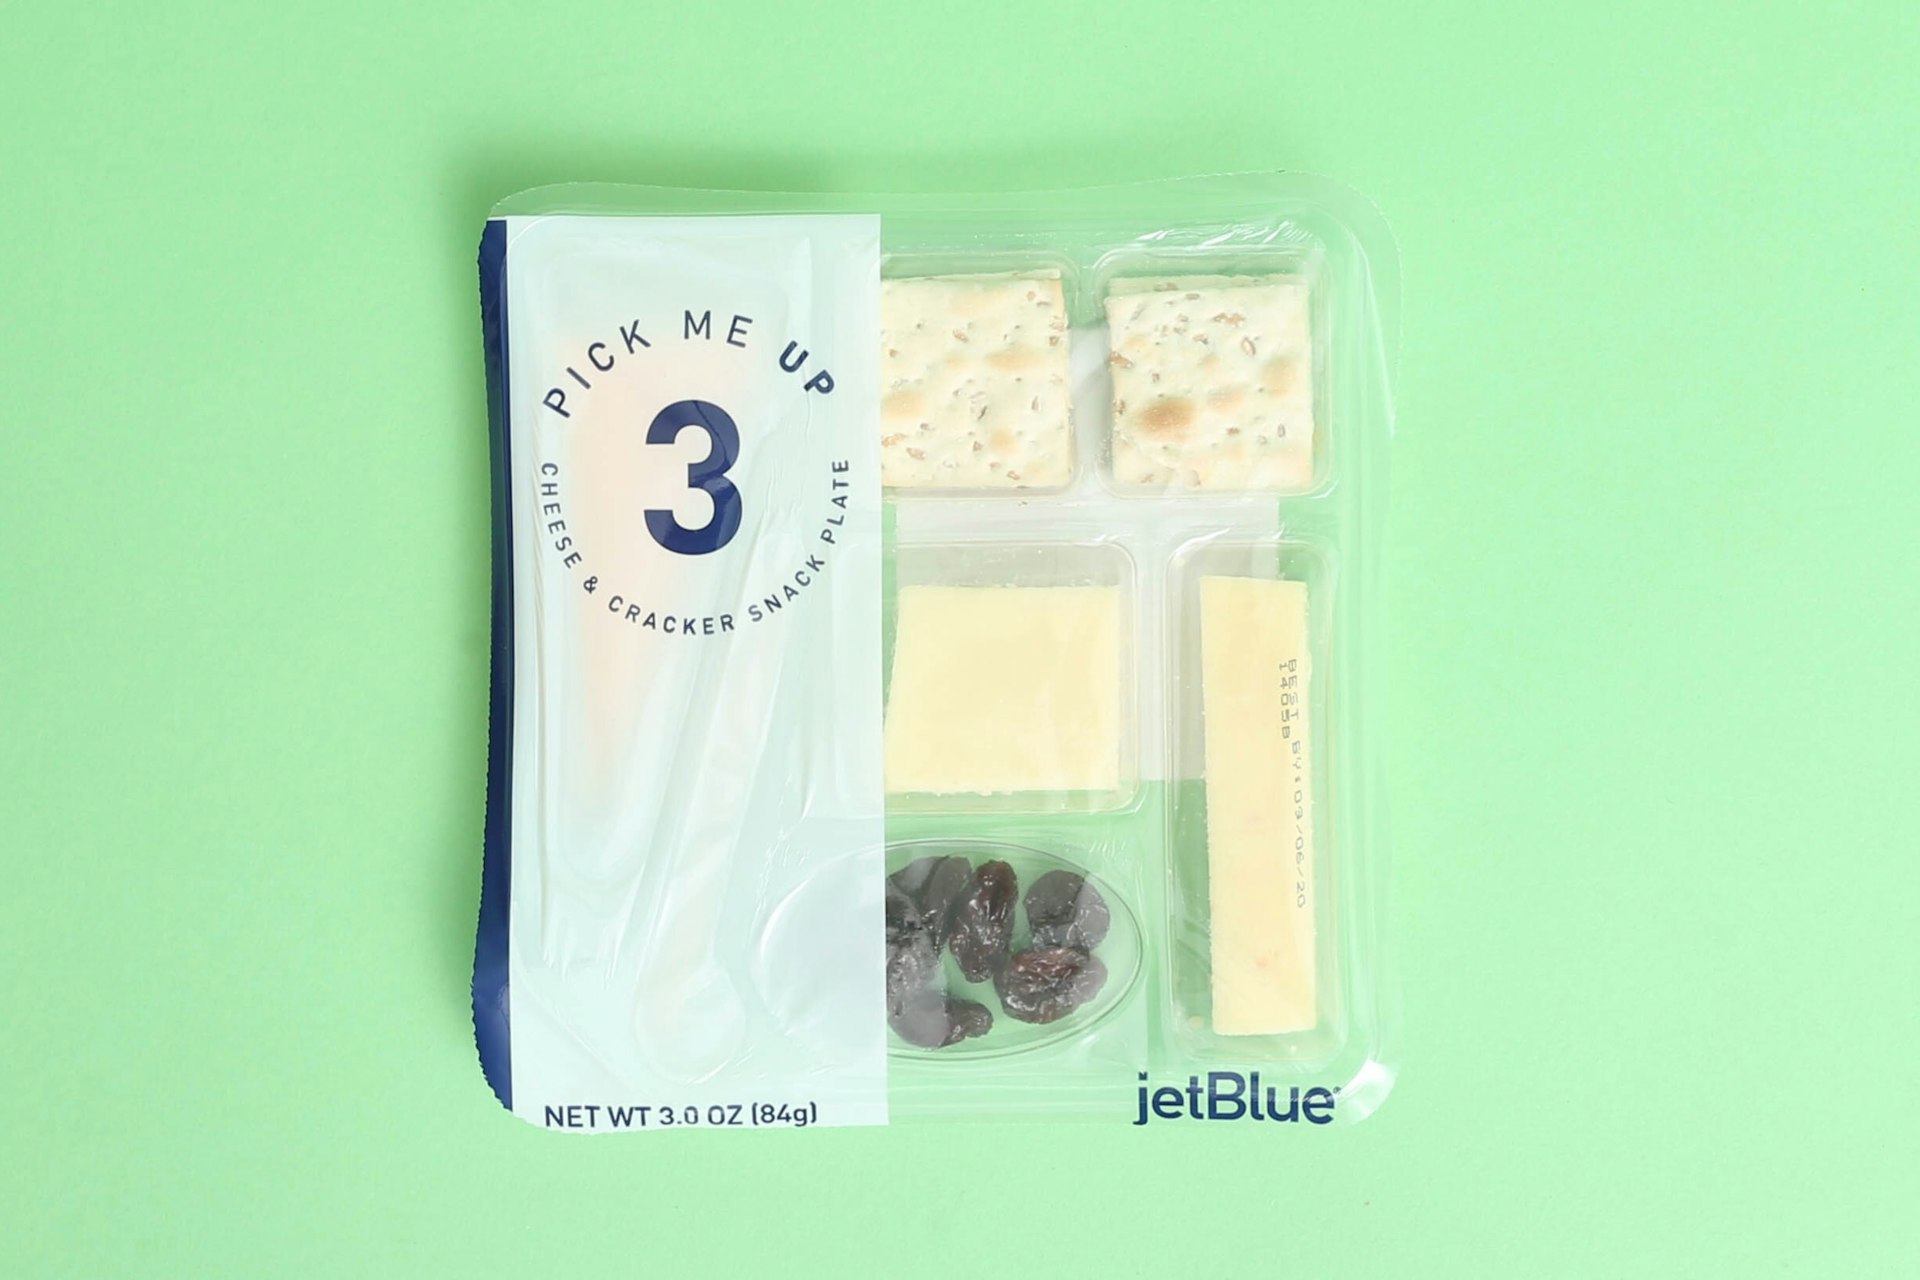 The JetBlue cheese pack